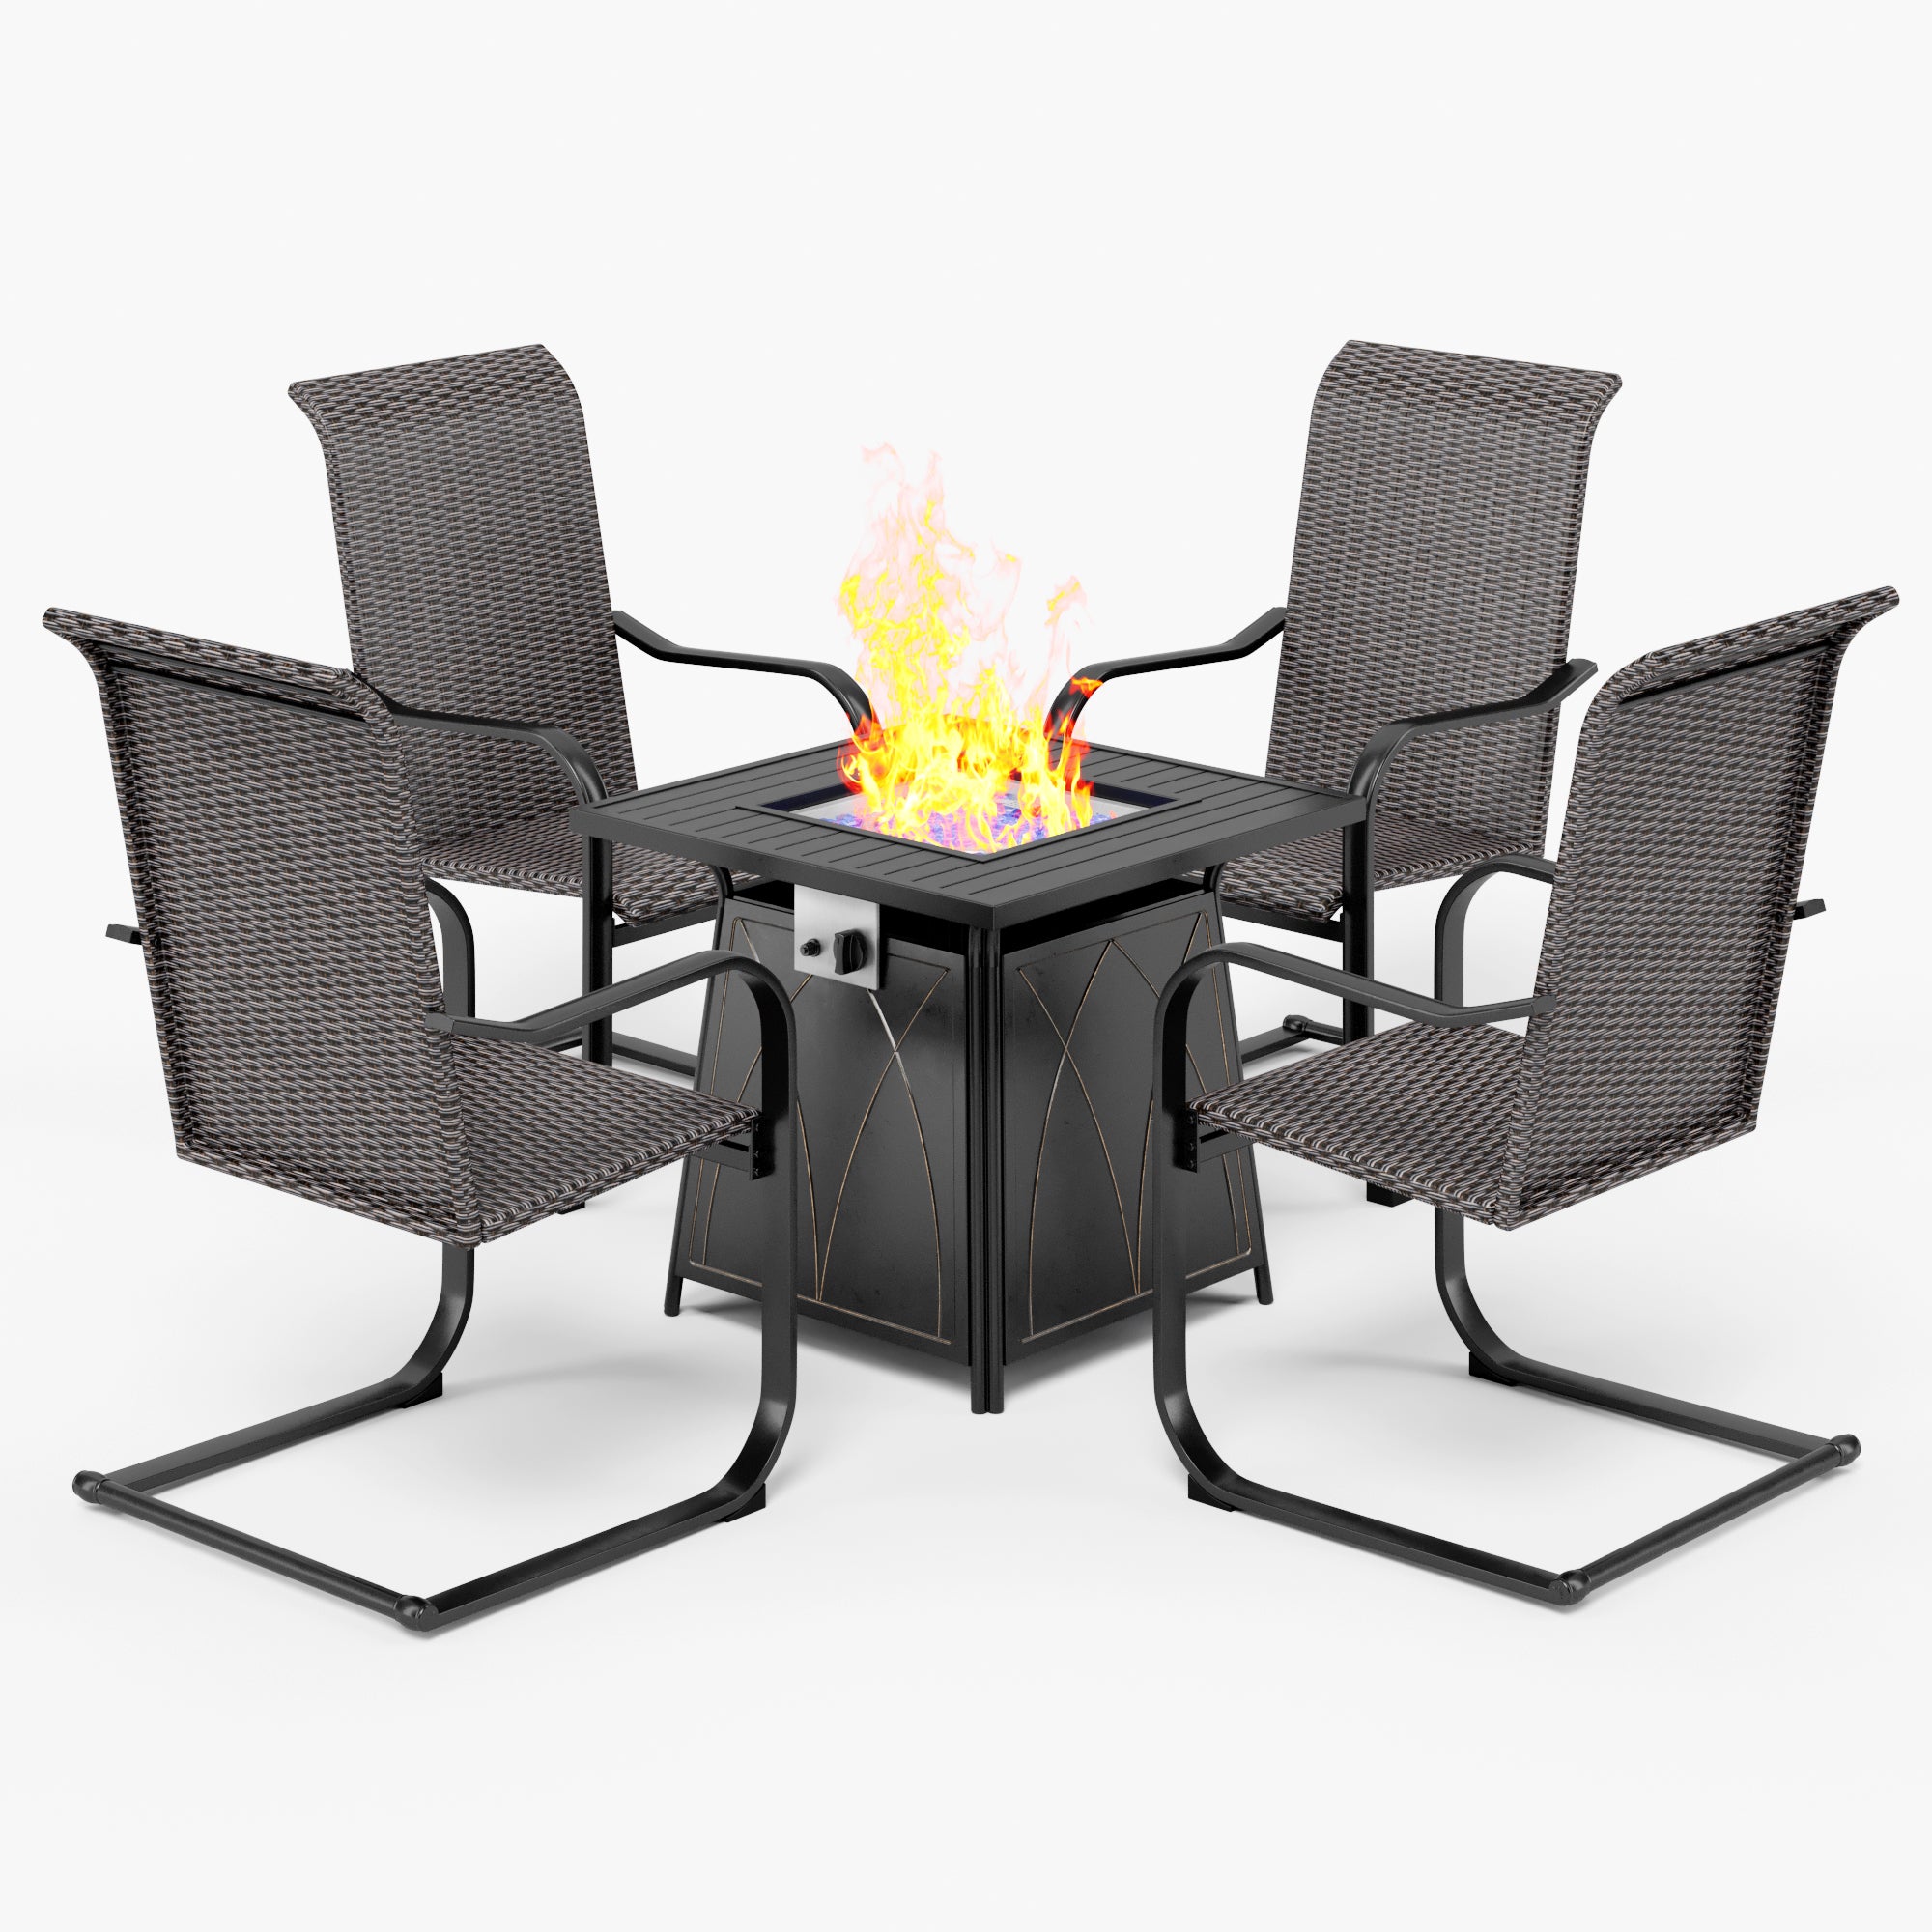 Sophia & William 5-Piece Outdoor Dining Set 50,000 BTU Gas Fire Pit Table & 4 Rattan C-spring Chairs